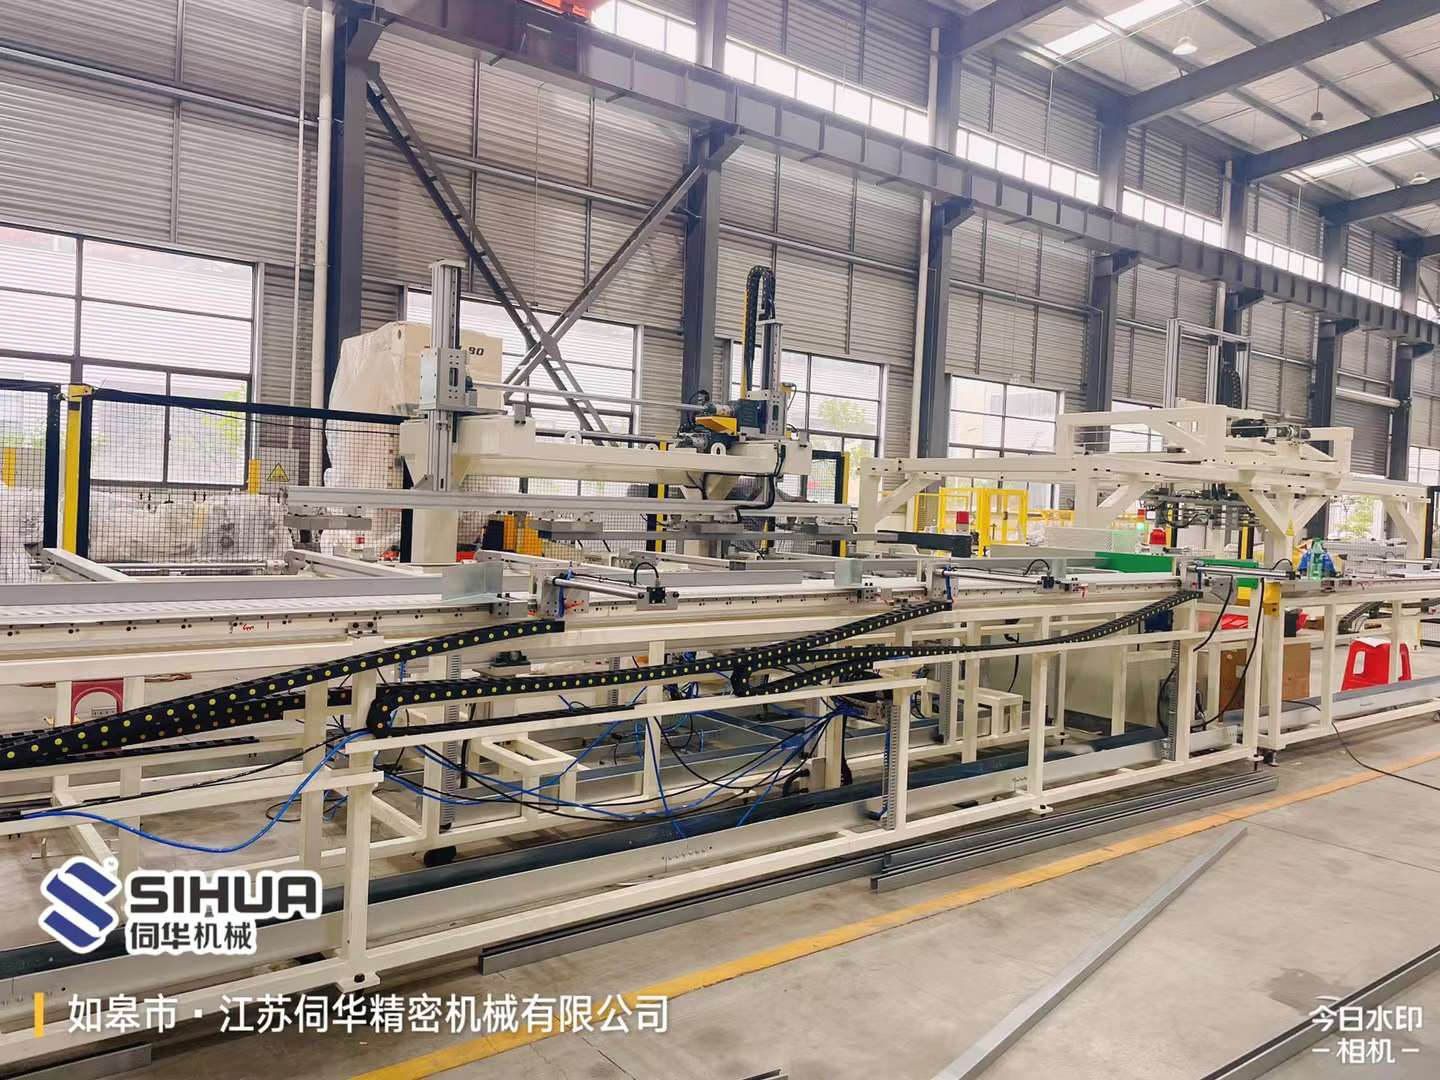 Automatic packing system of struct channel roll forming machine replaces the manual boring work